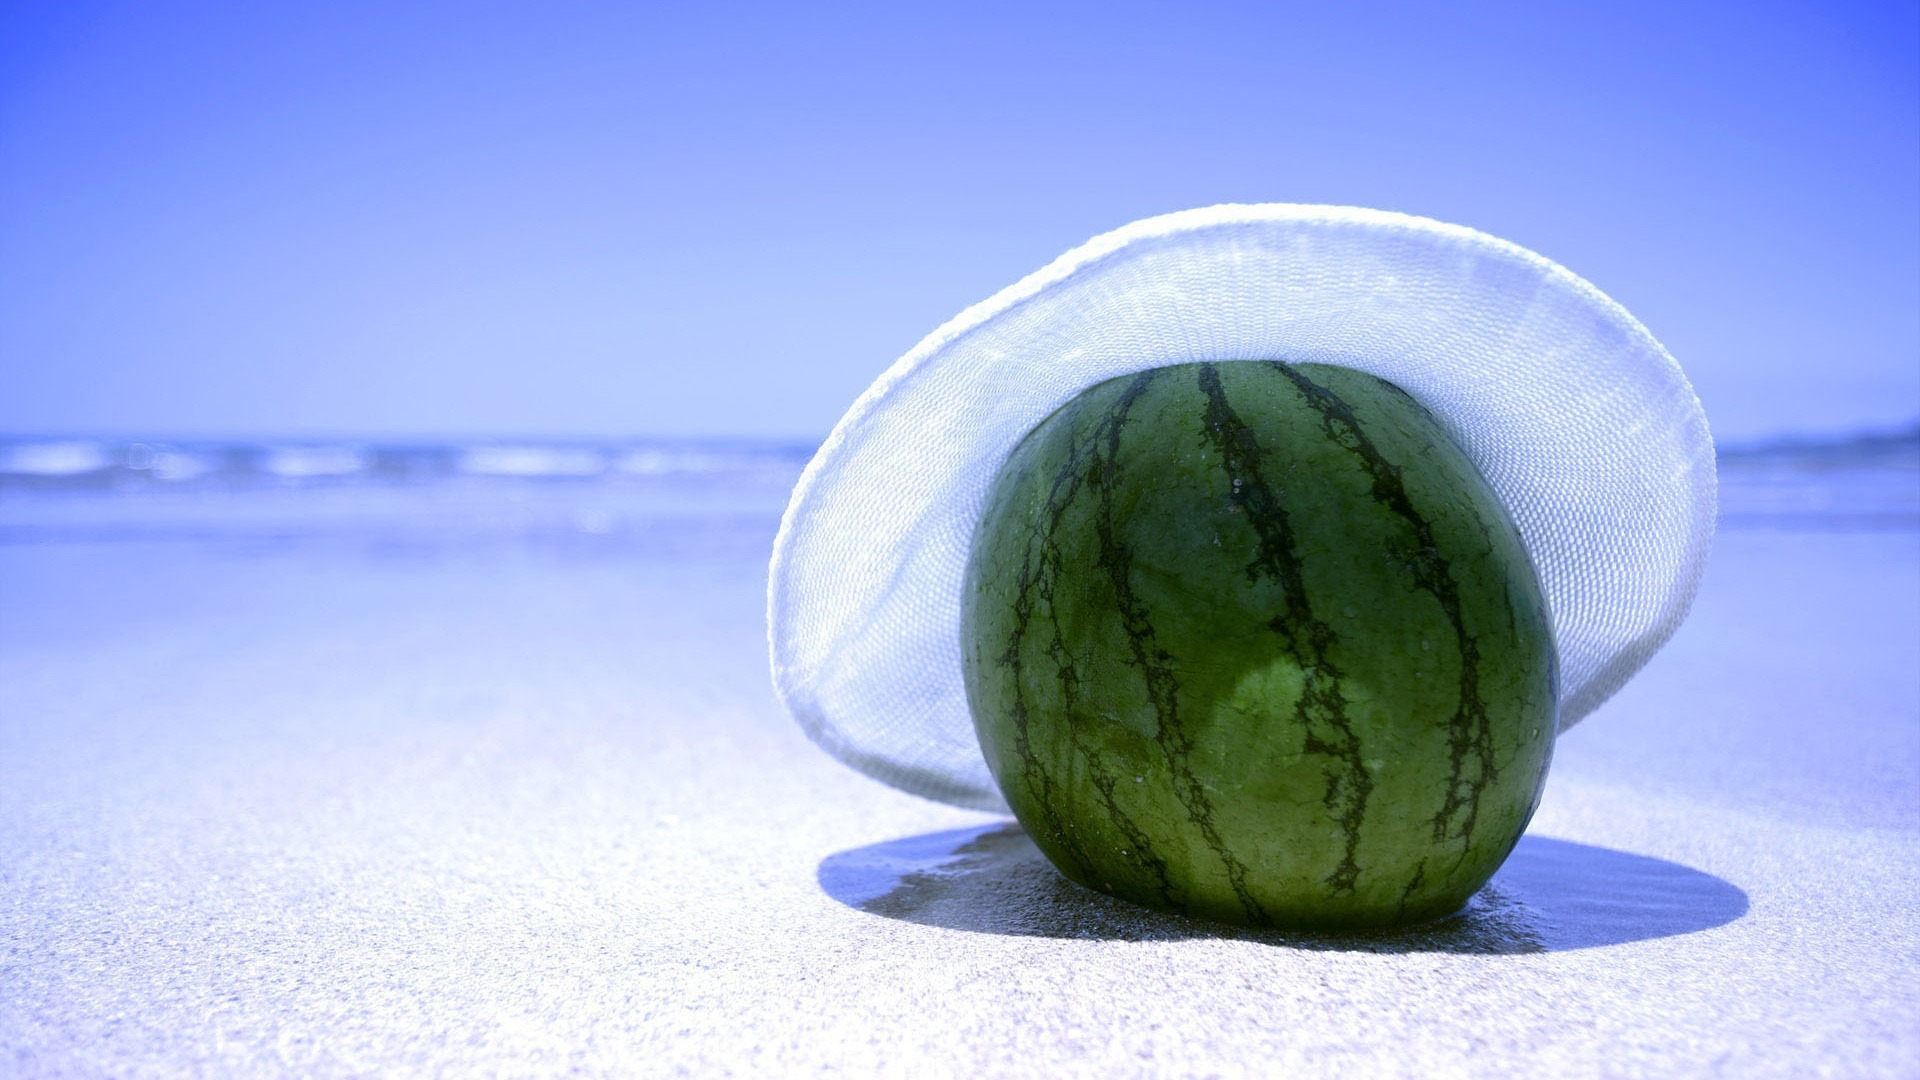 Watermelon on the beach for 1920 x 1080 HDTV 1080p resolution